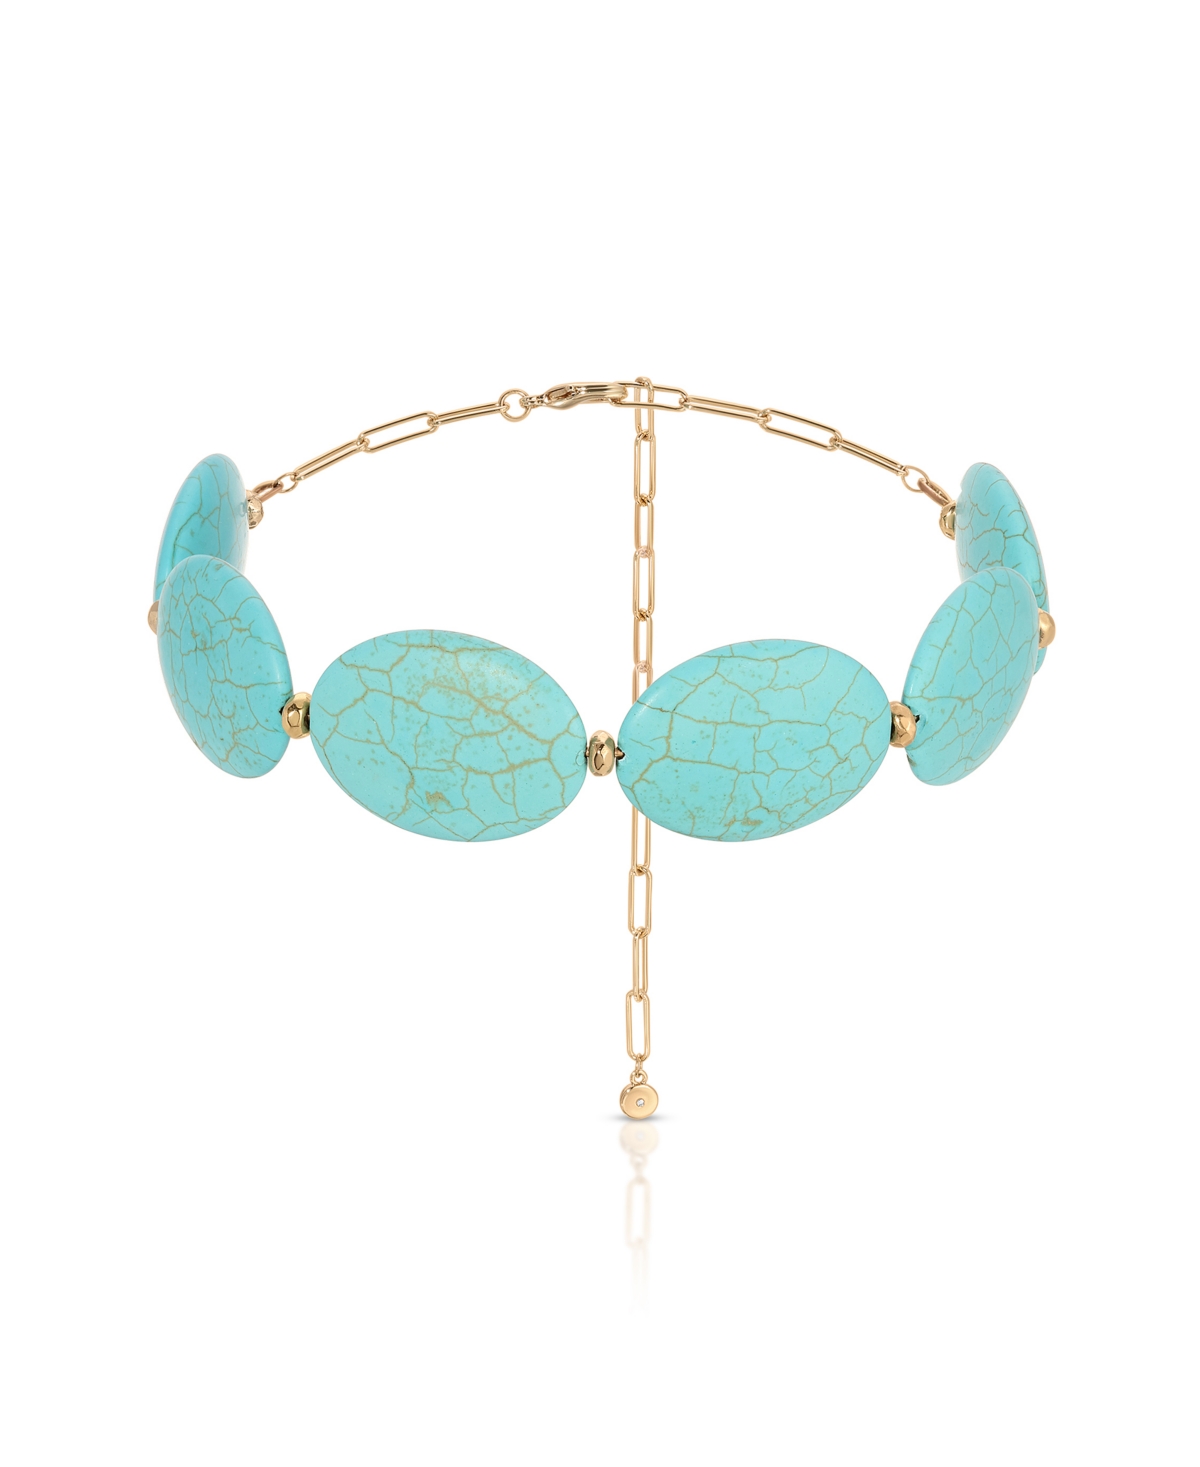 Oval Turquoise Stones Statement Choker - Turquoise